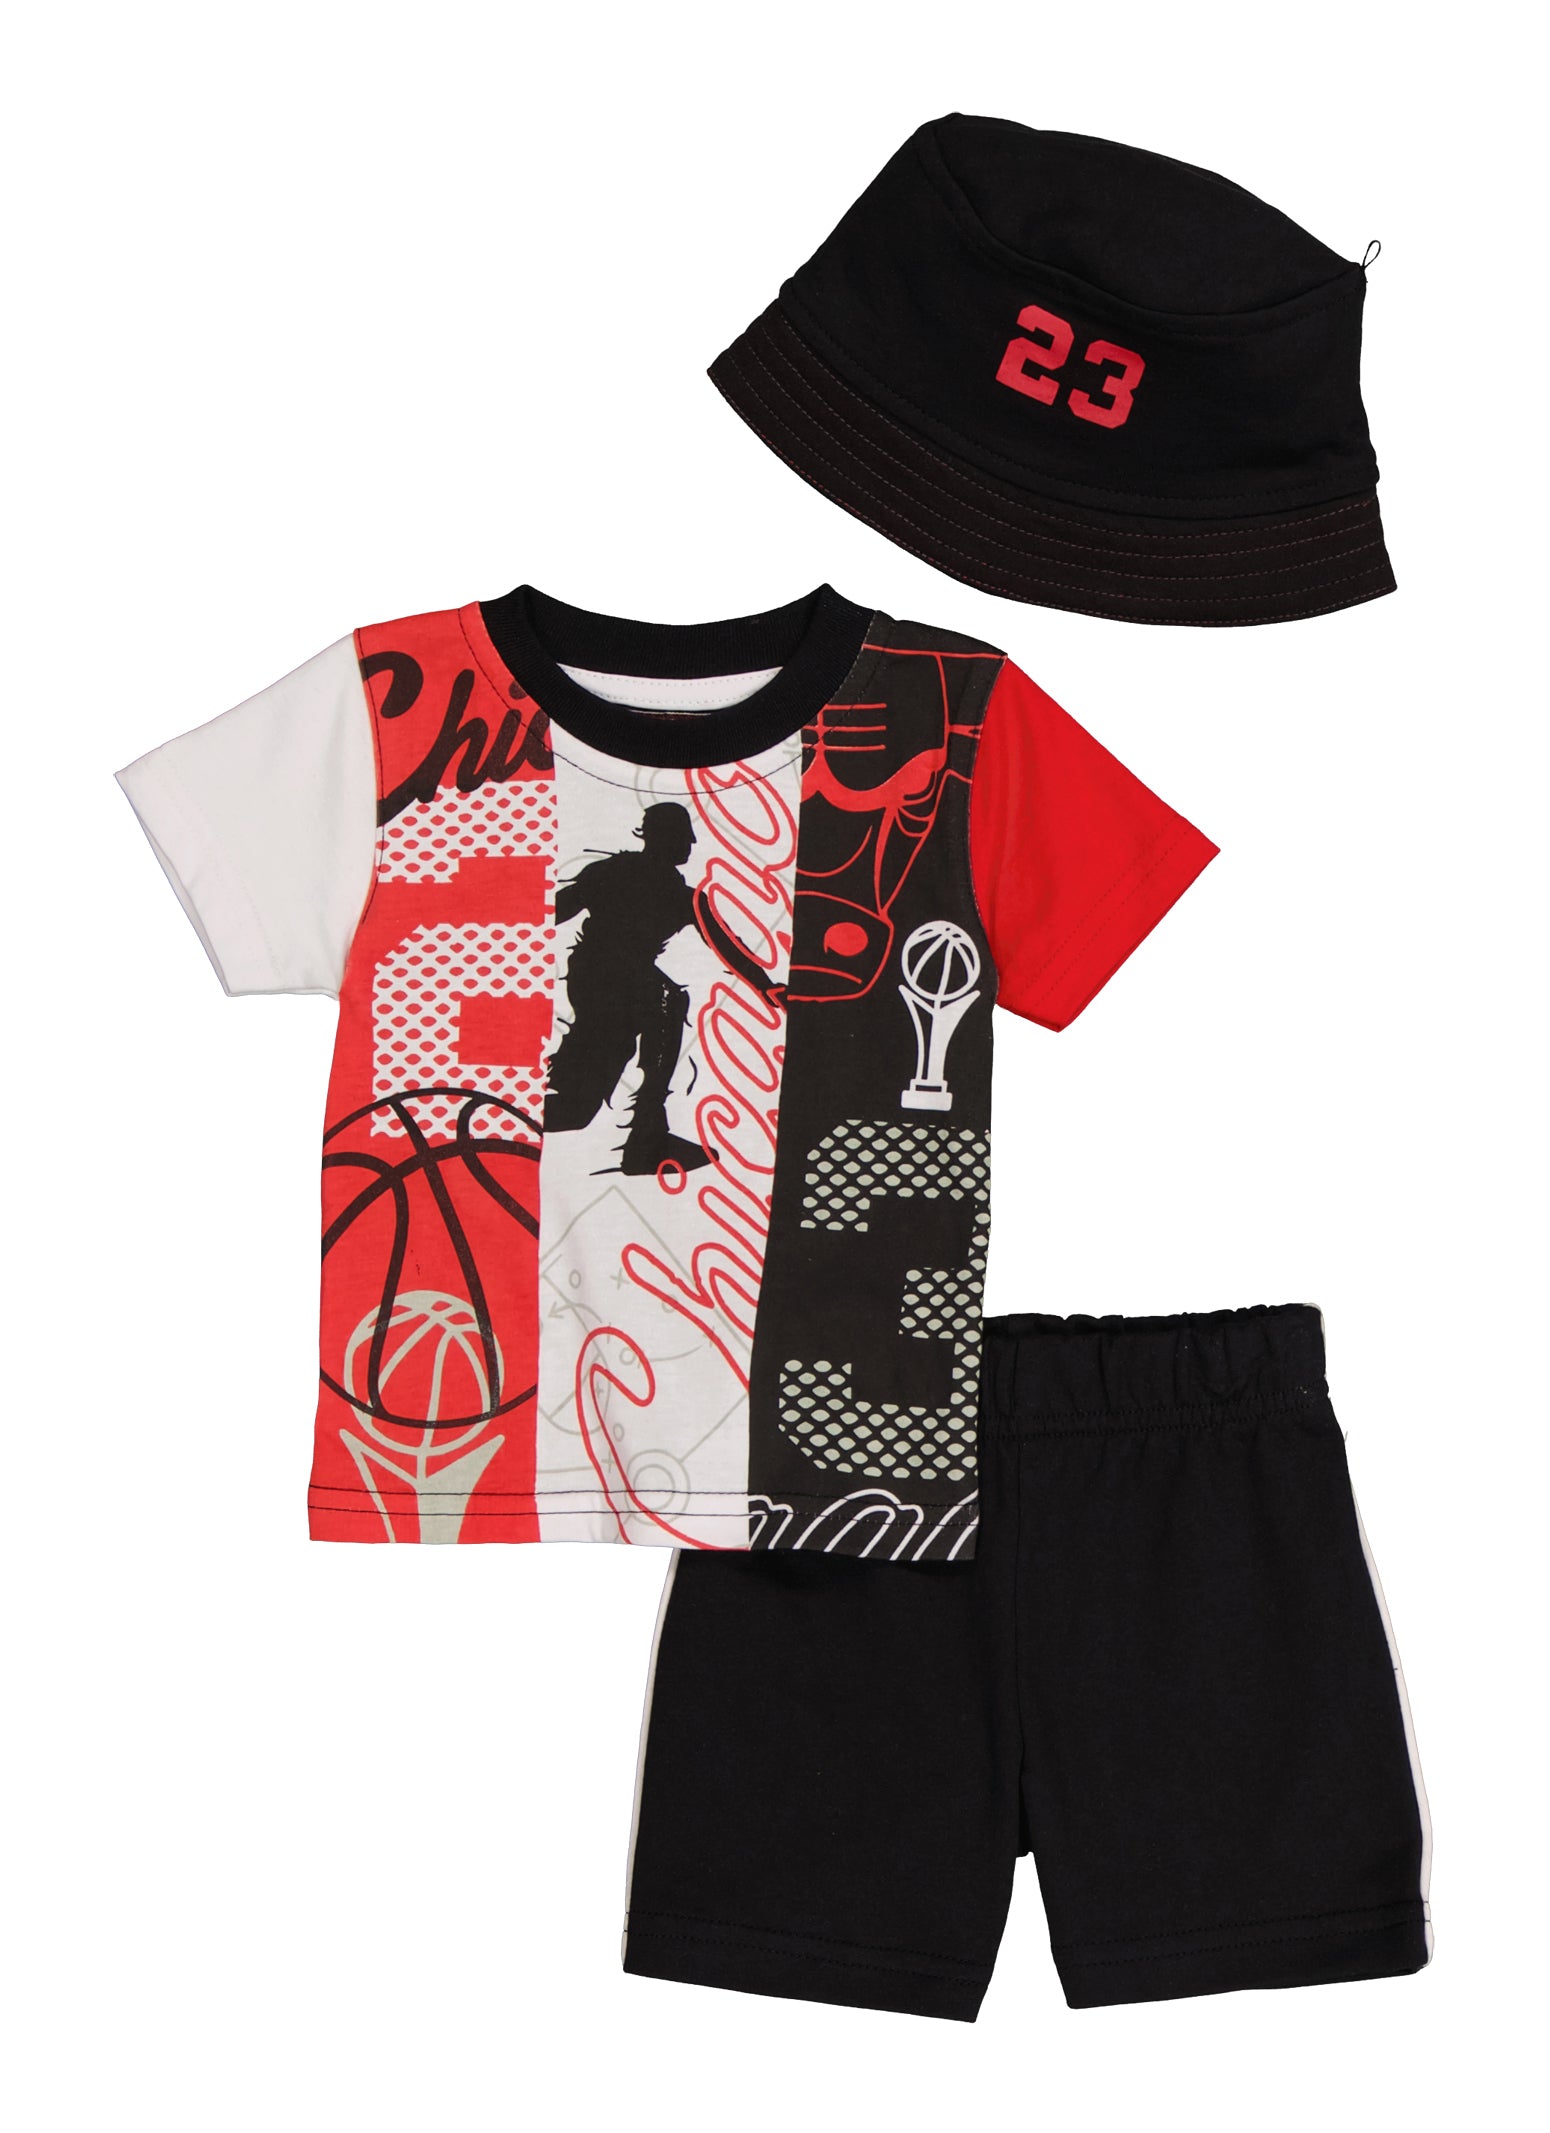 Baby Boys 0-9M Chicago Graphic Tee with Shorts and Hat, Multi, Size 6-9M